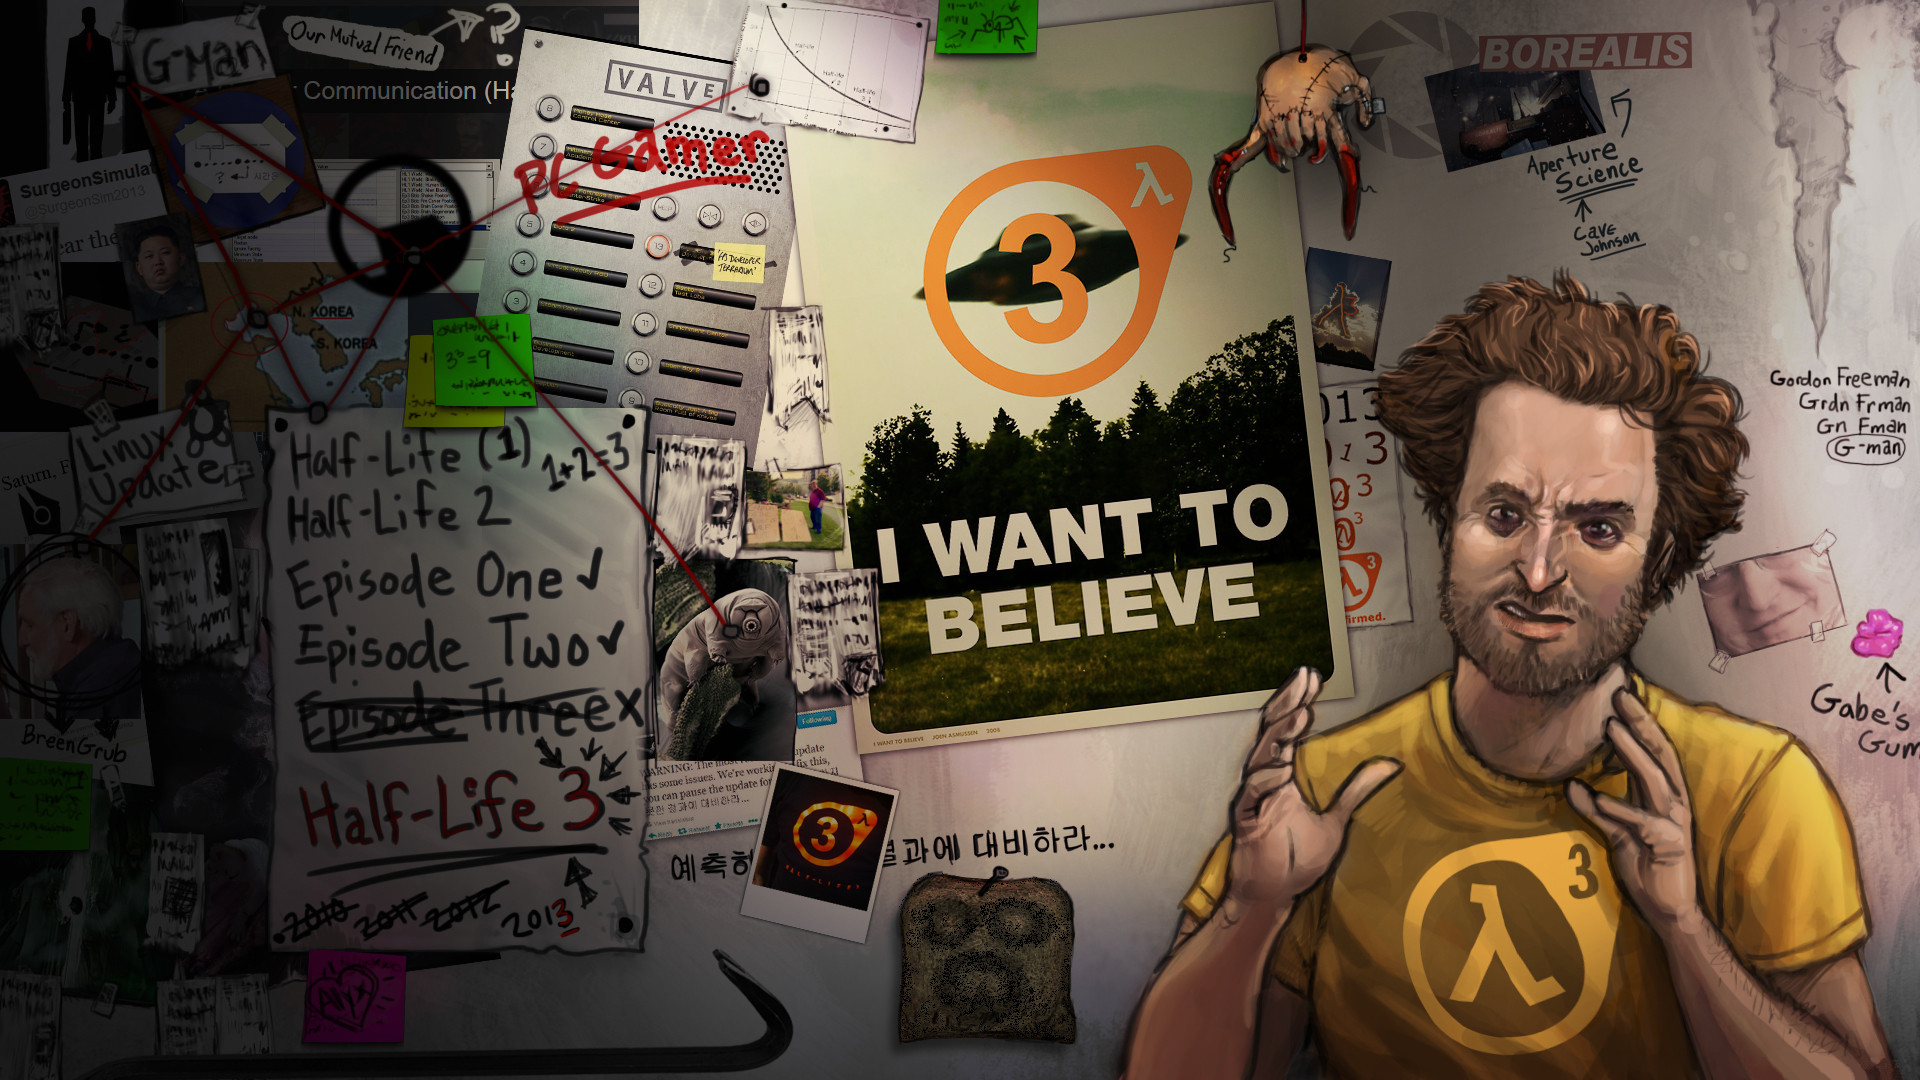 Half-Life 3 -- Where are you? [Archive] - Page 28 - Steam Users' Forums